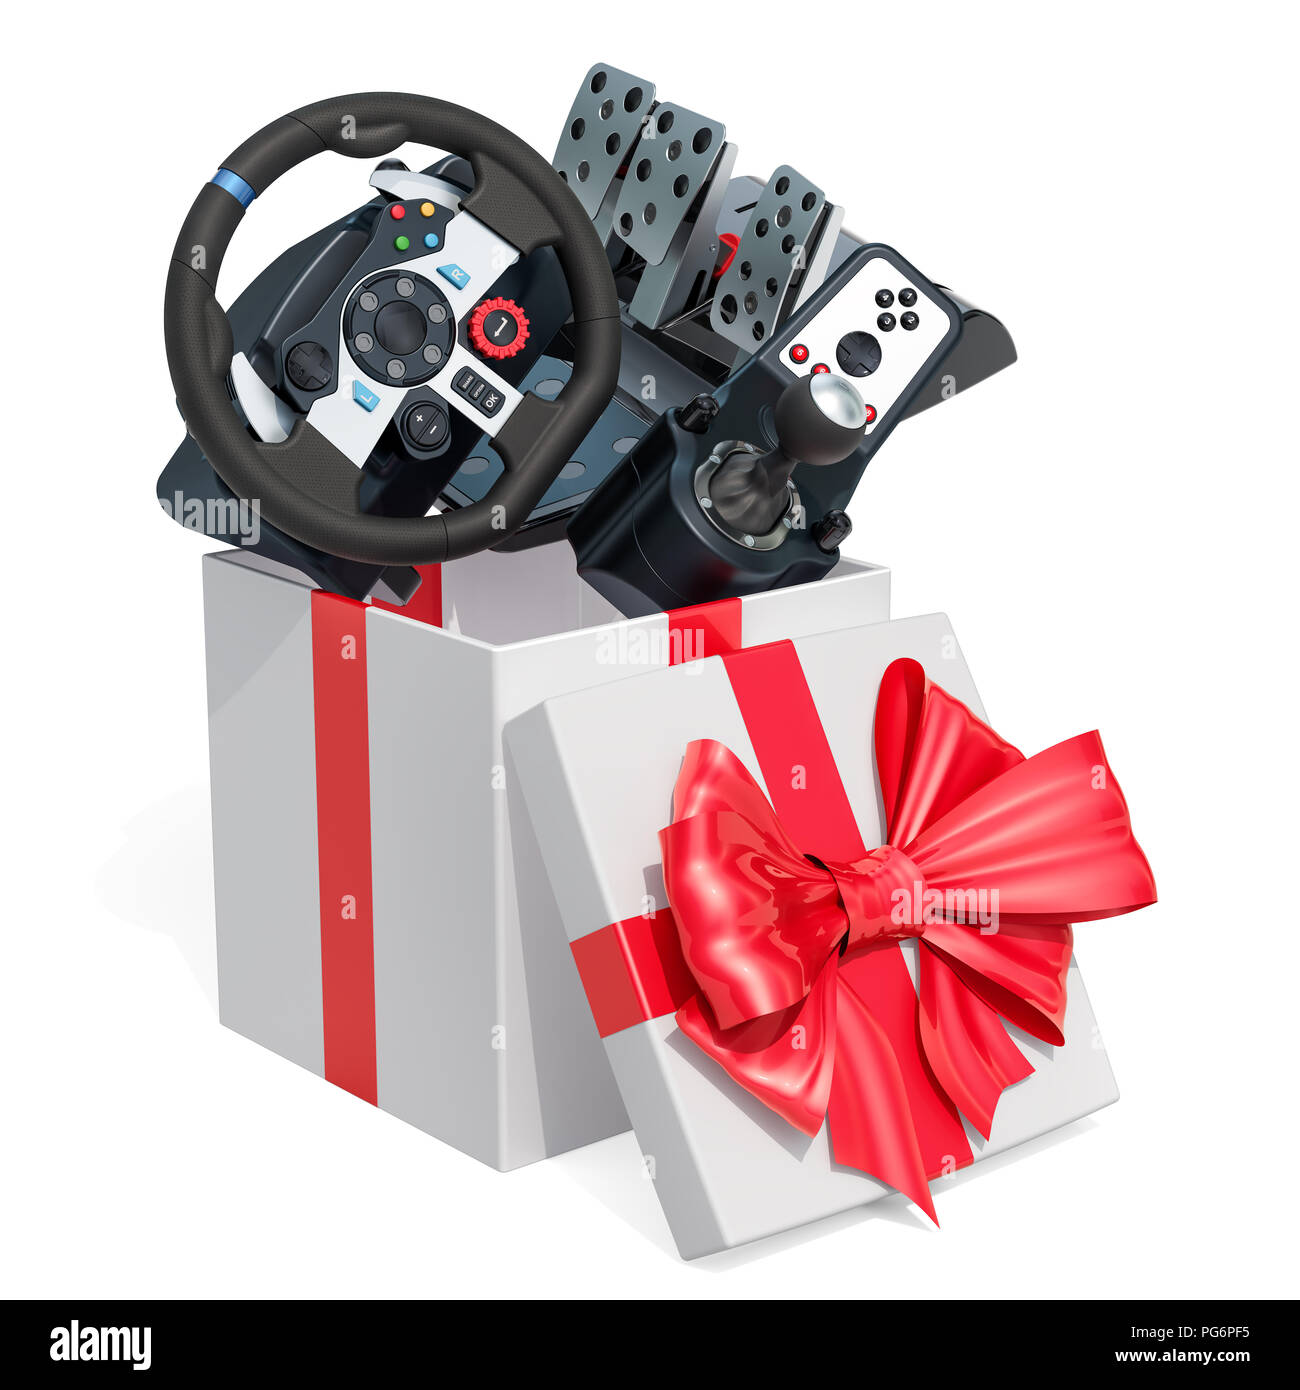 Gaming steering wheel with foot pedals inside gift box. 3D rendering isolated on white background Stock Photo